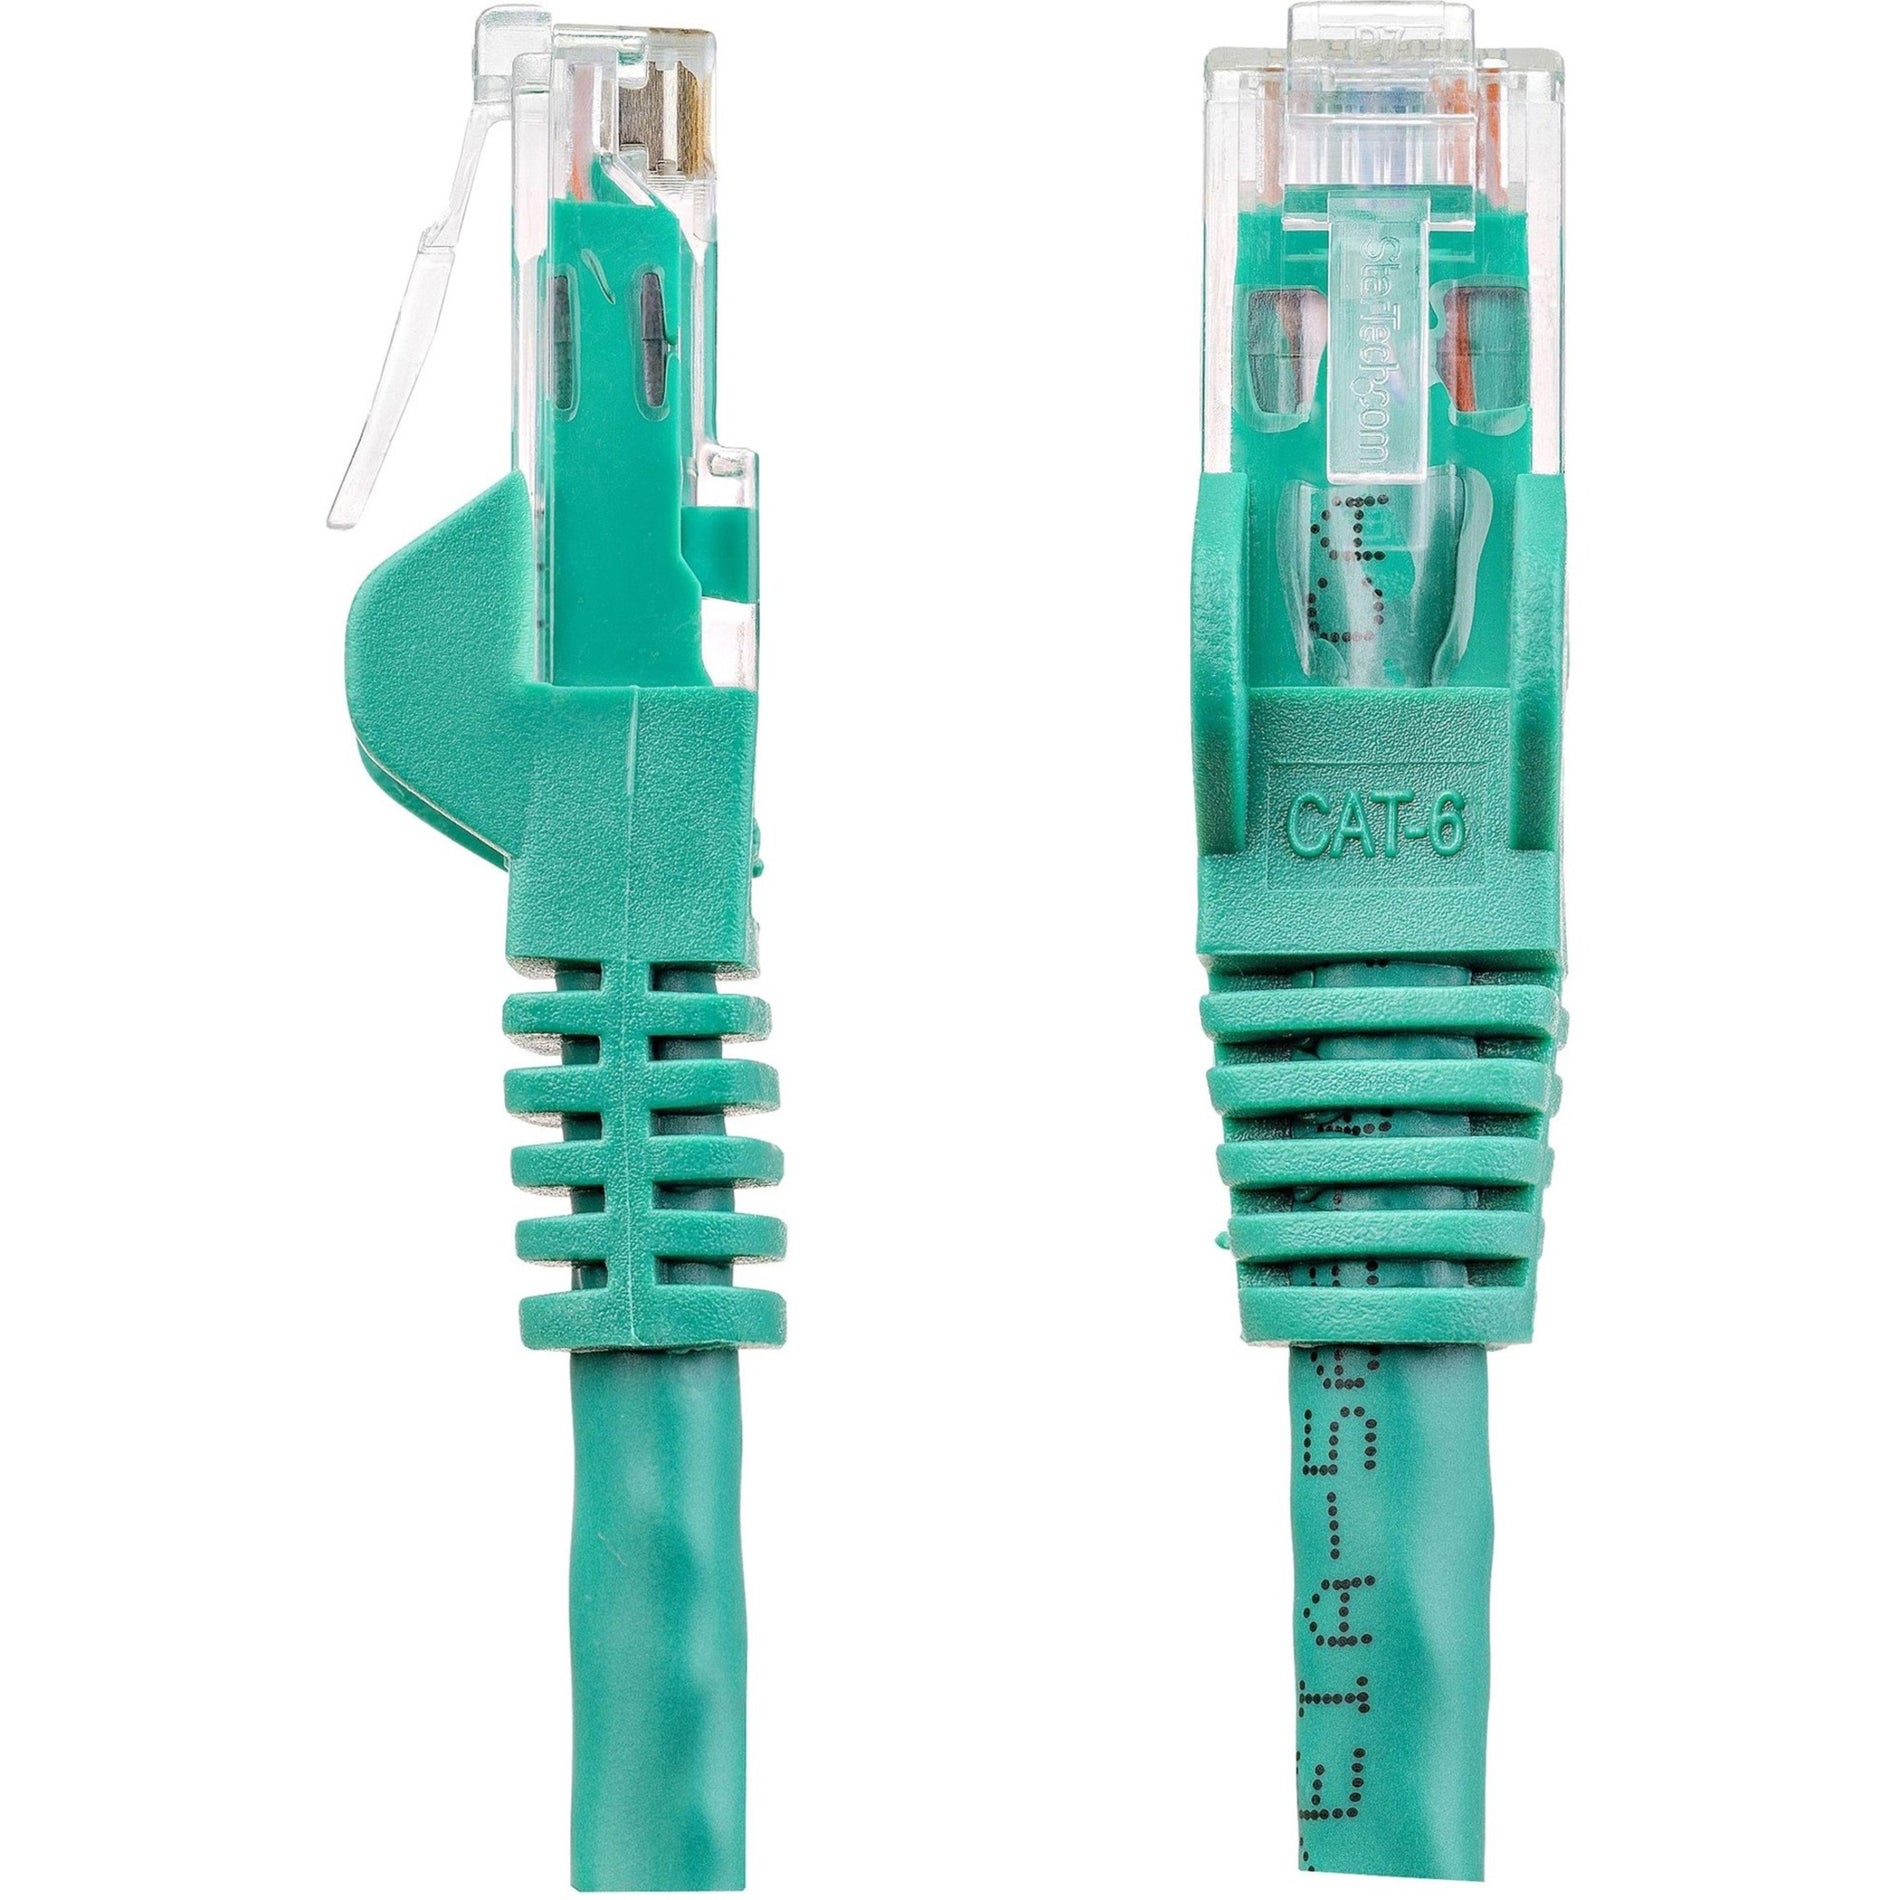 StarTech.com N6PATCH30GN Cat. 6 Network Cable, 30ft Green Ethernet Cable, Snagless RJ45 Connectors